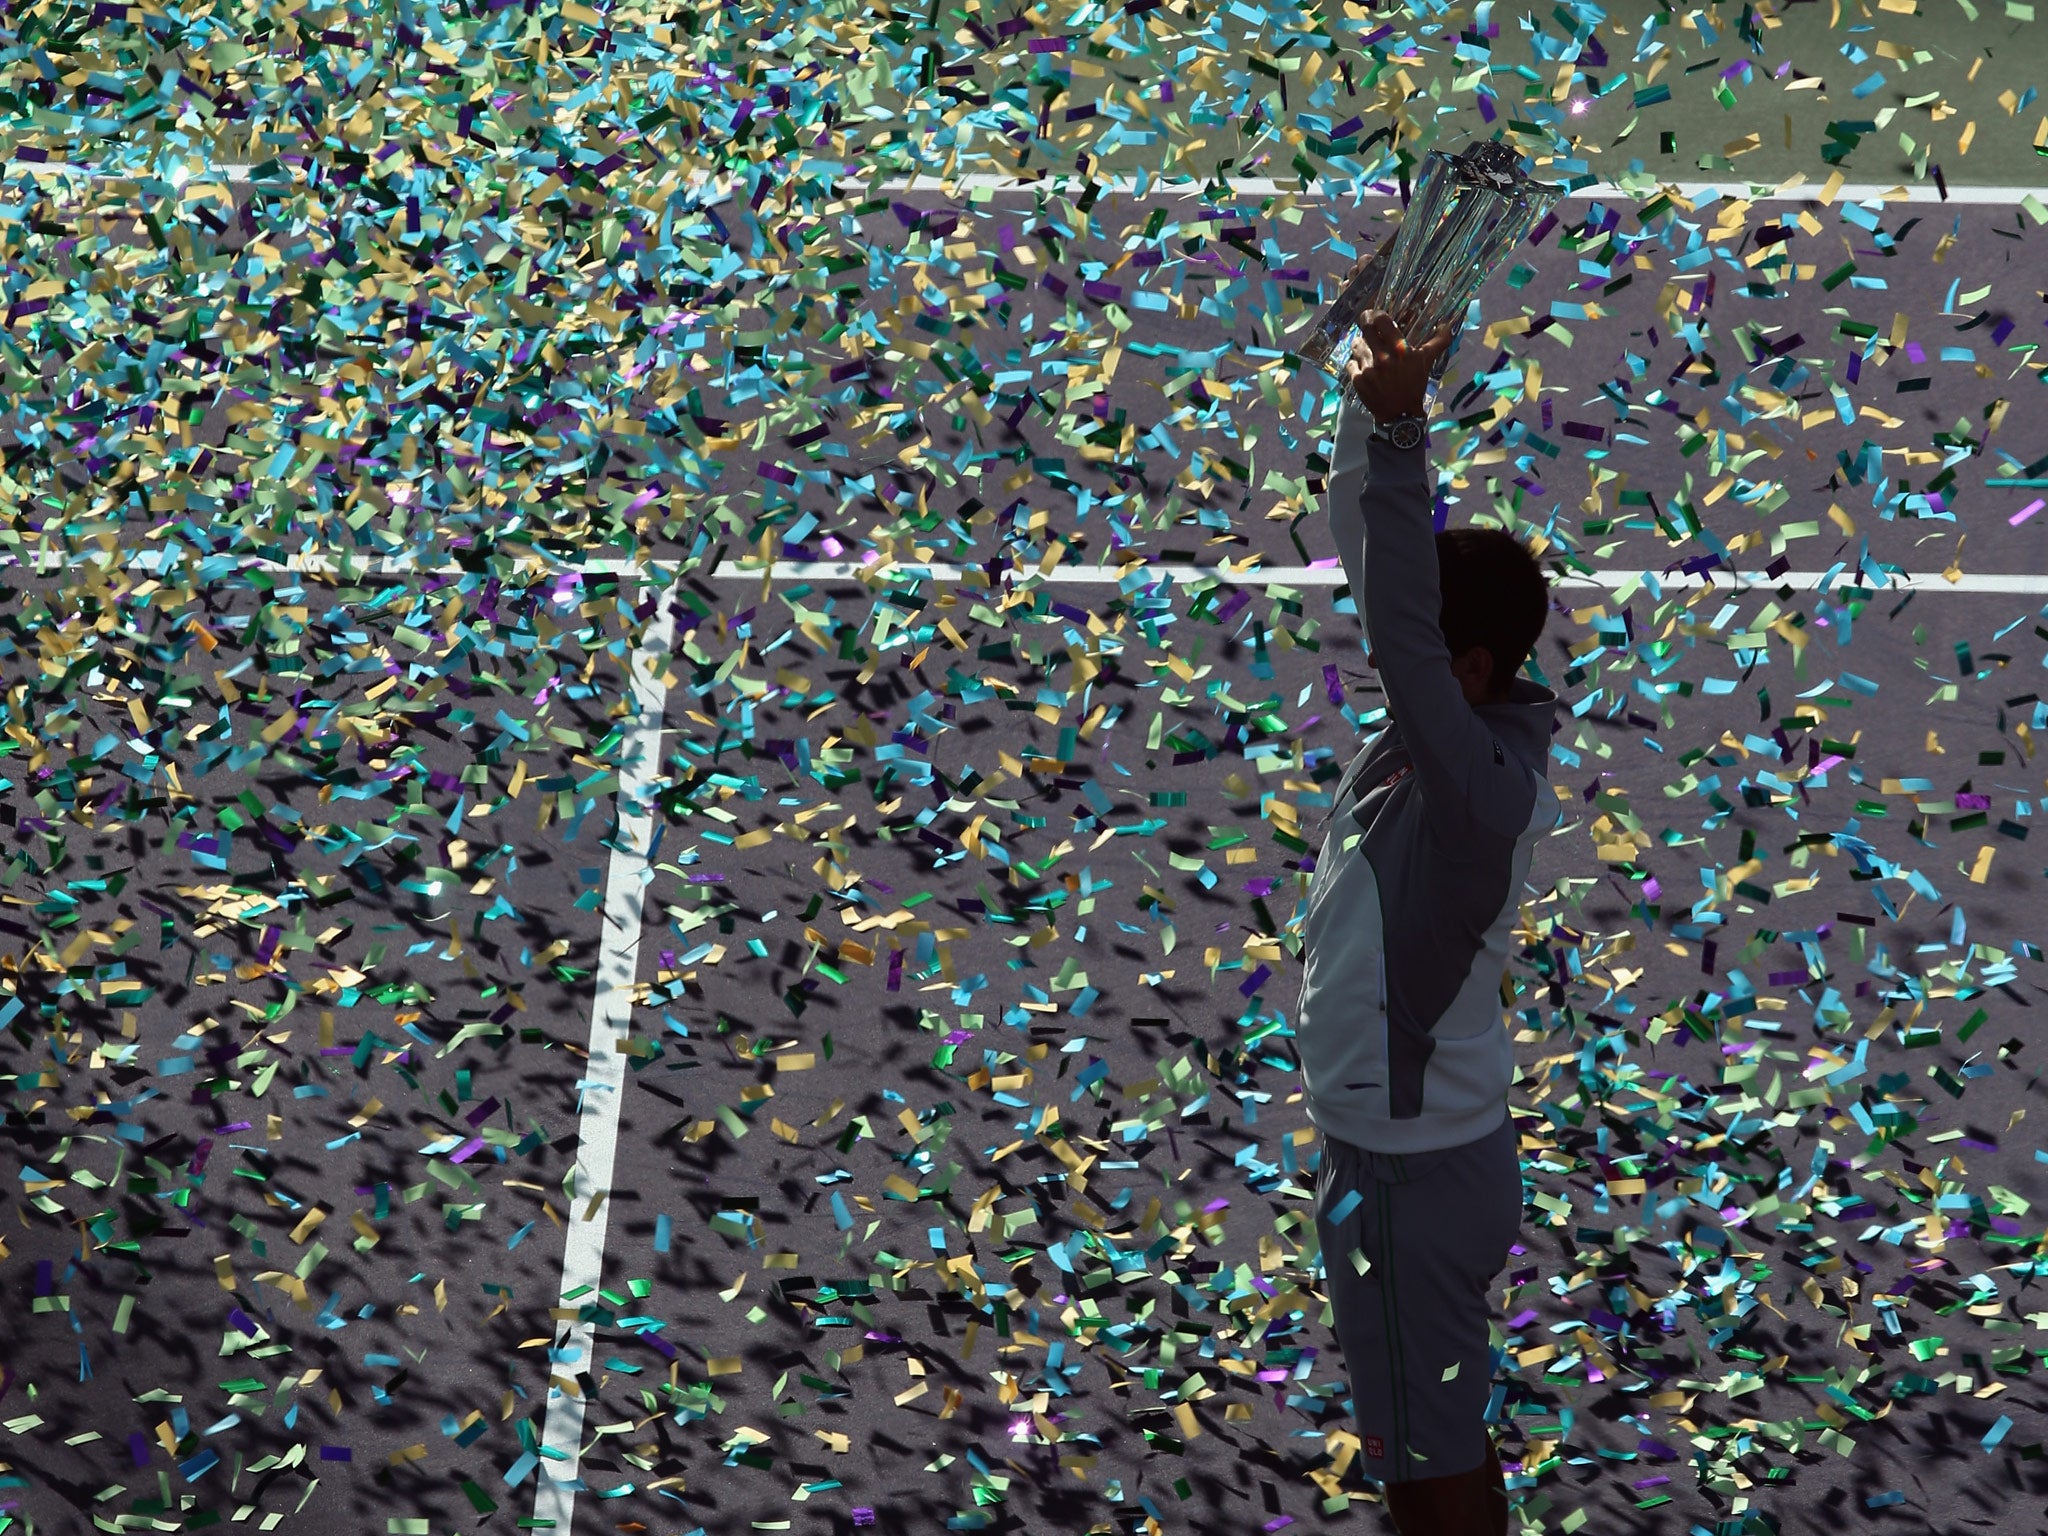 Novak Djokovic of Serbia celebrates with the trophy following his victory over Roger Federer in the final of the BNP Paribas Open at Indian Wells